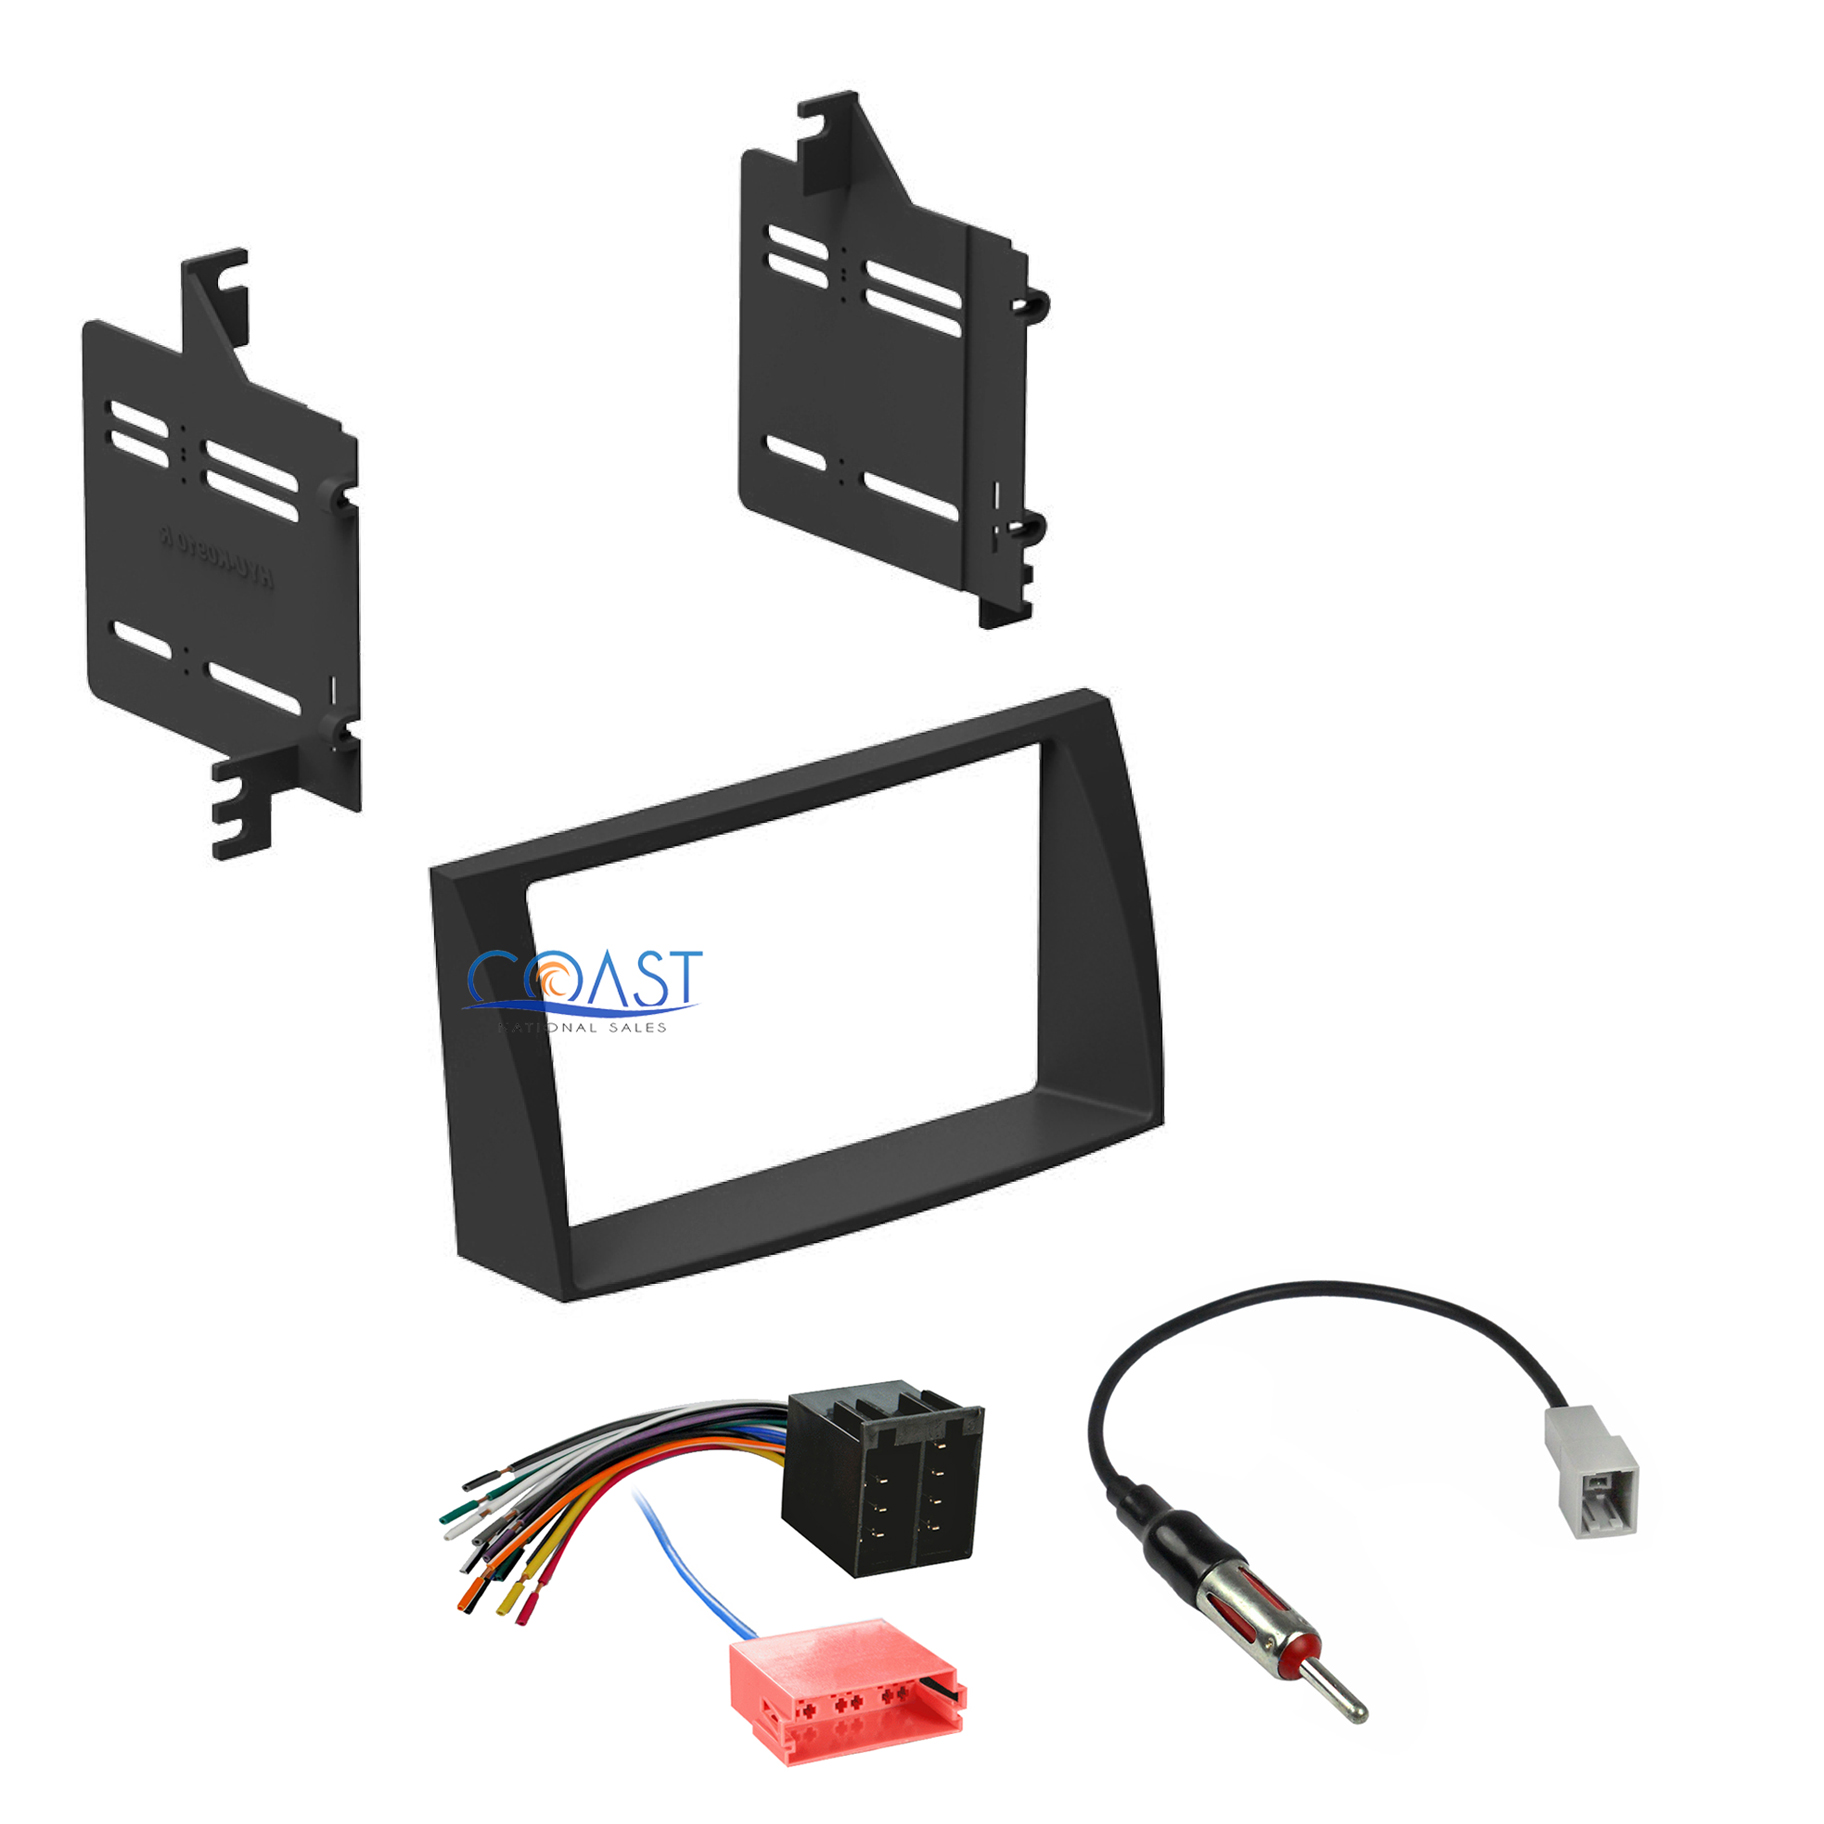 Double DIN Car Stereo Dash Kit + Harness + Antenna for